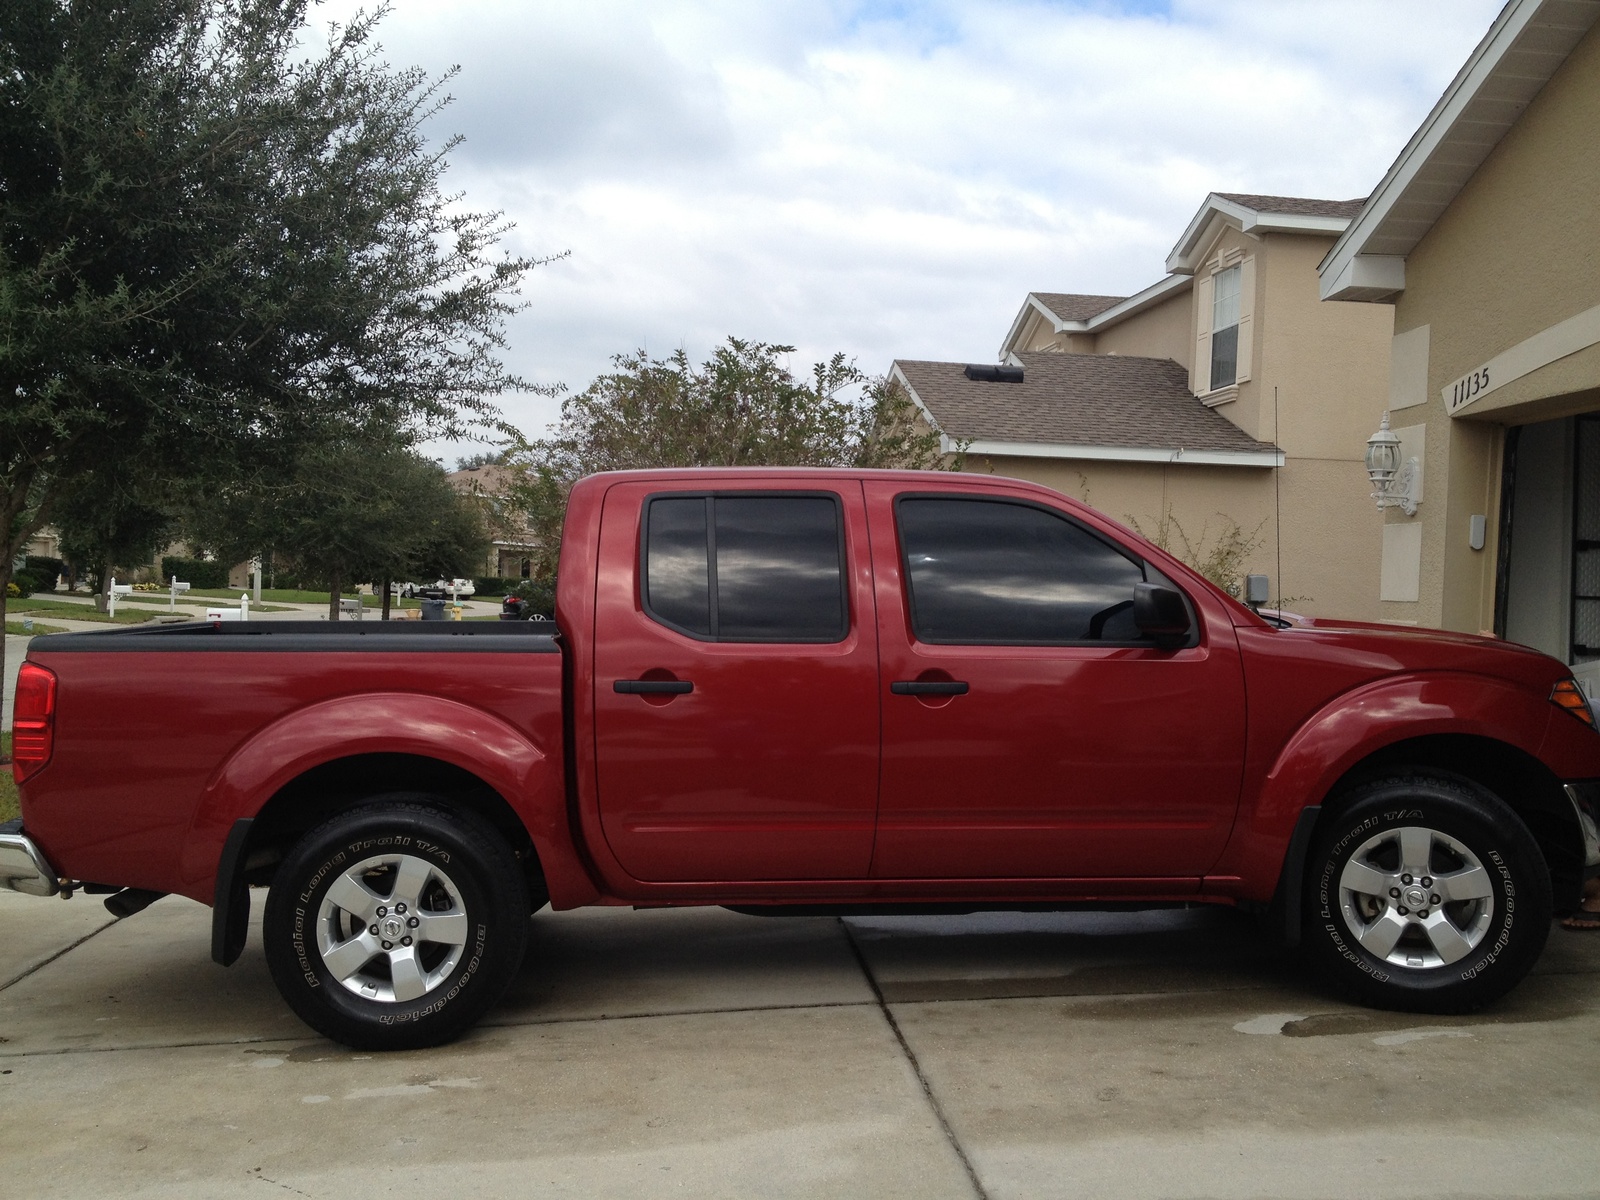 2010 Nissan frontier crew cab user reviews #1